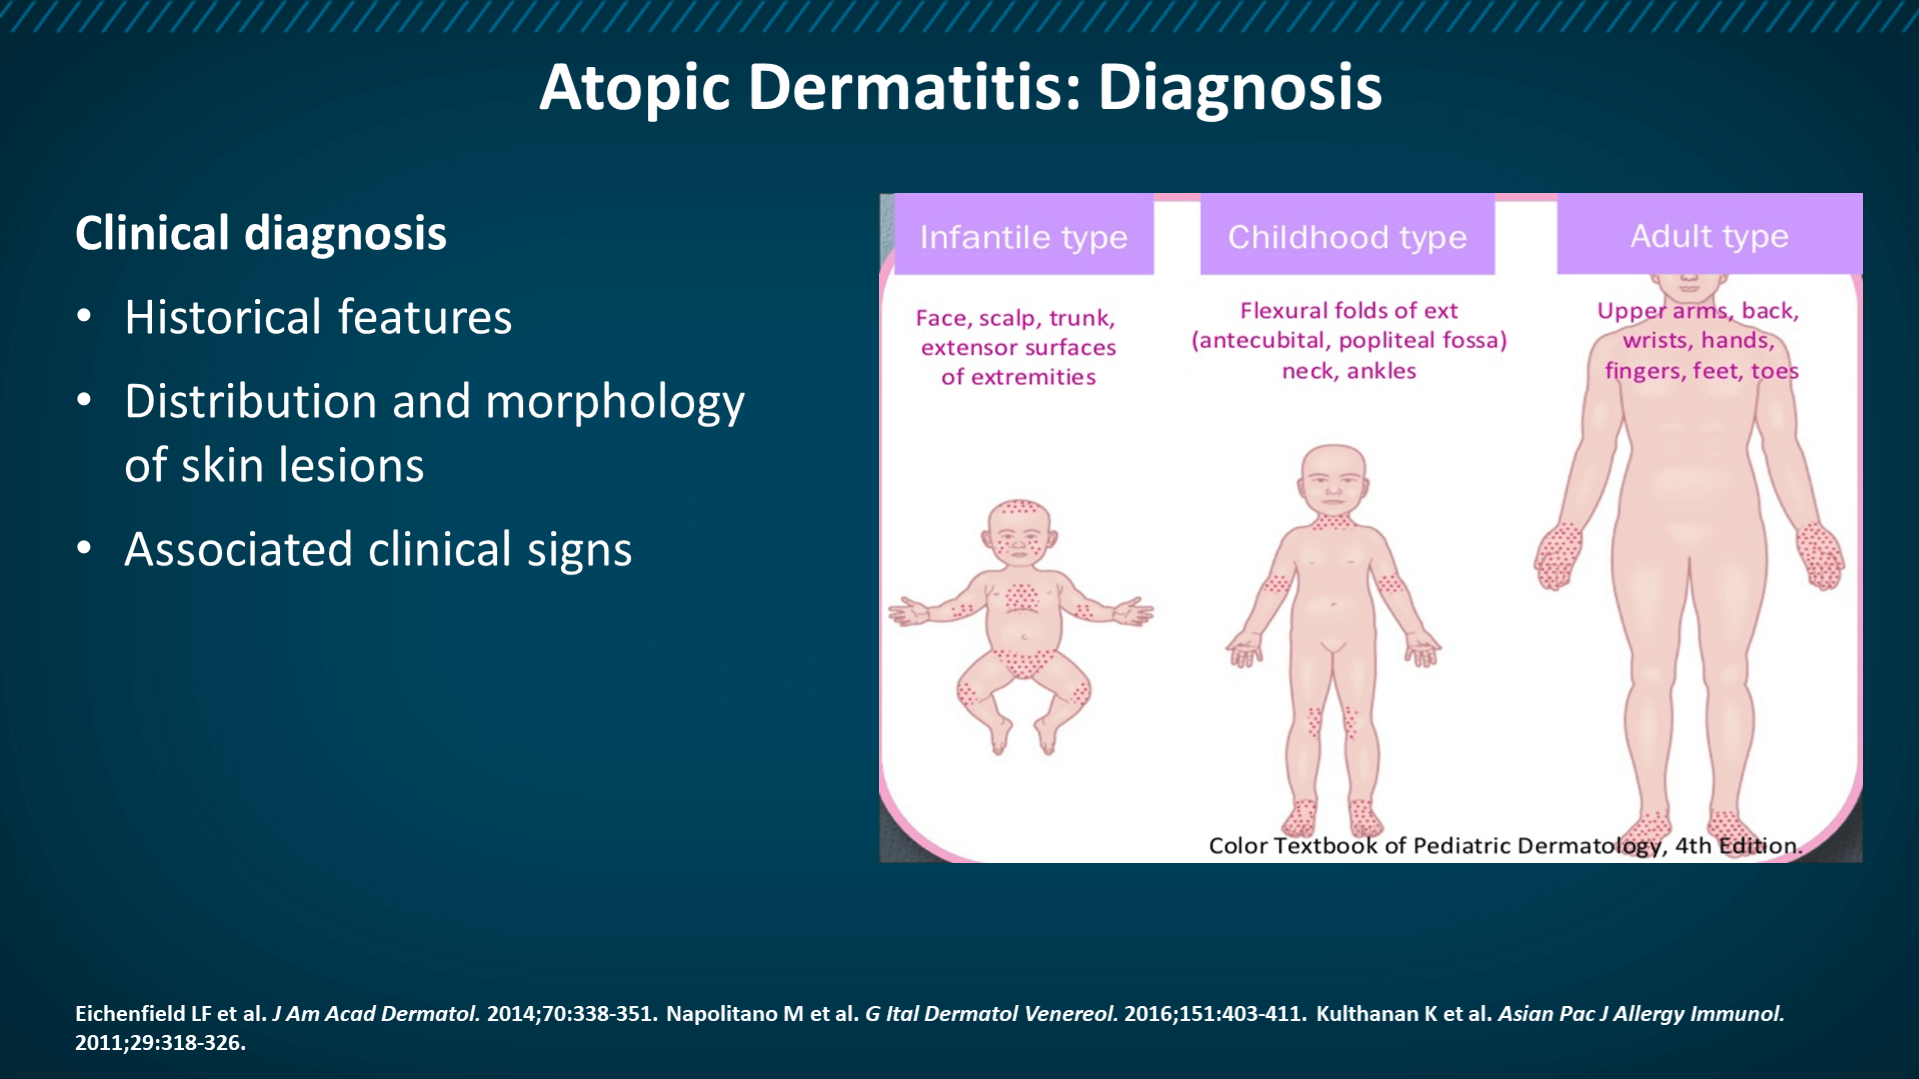 Atopic Dermatitis: Overview of Current Diagnosis – Atopic Dermatitis